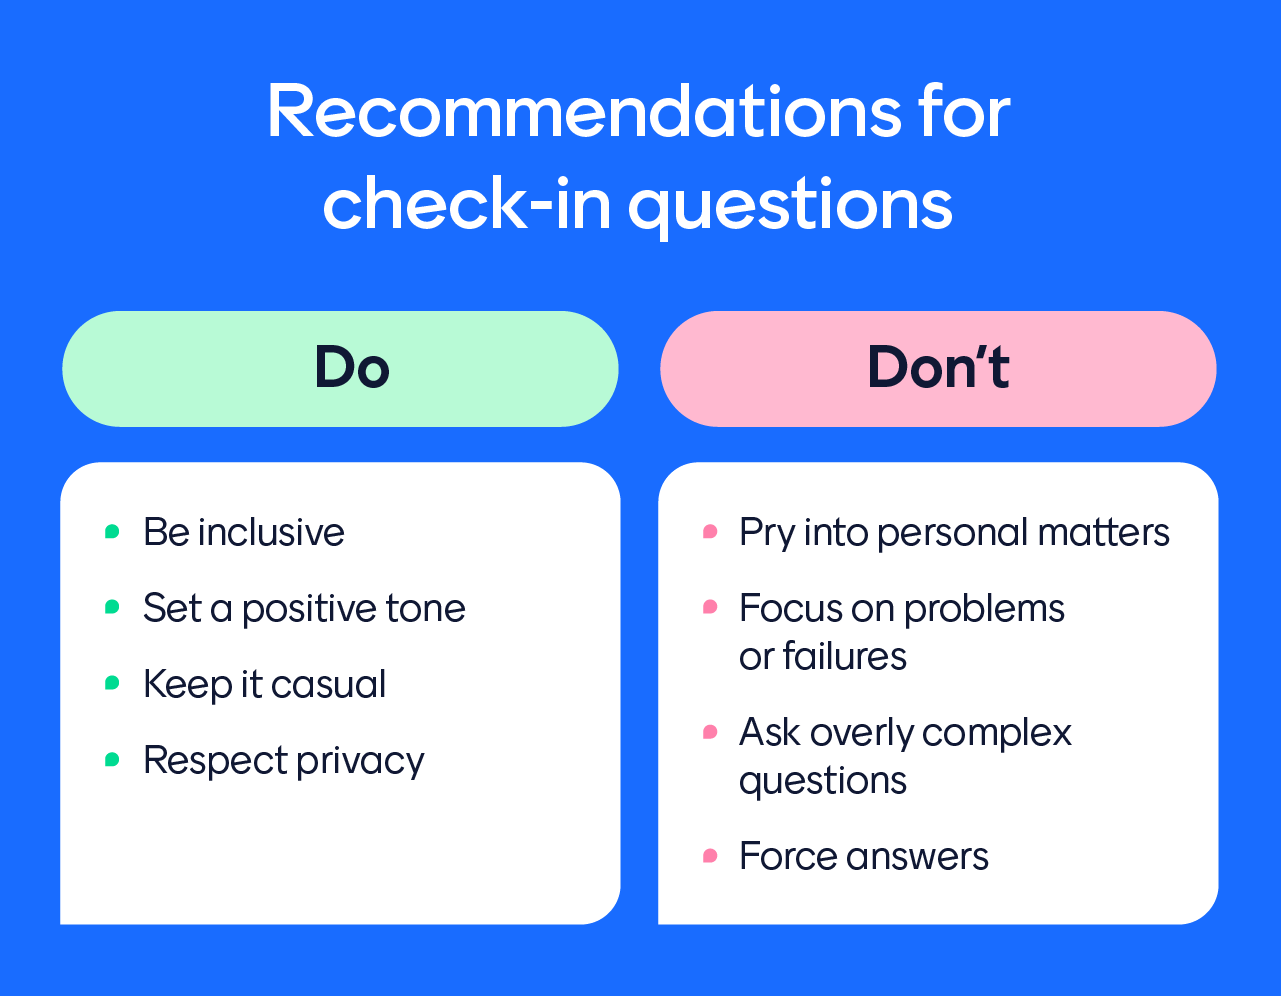 Check-in question do’s and don’ts